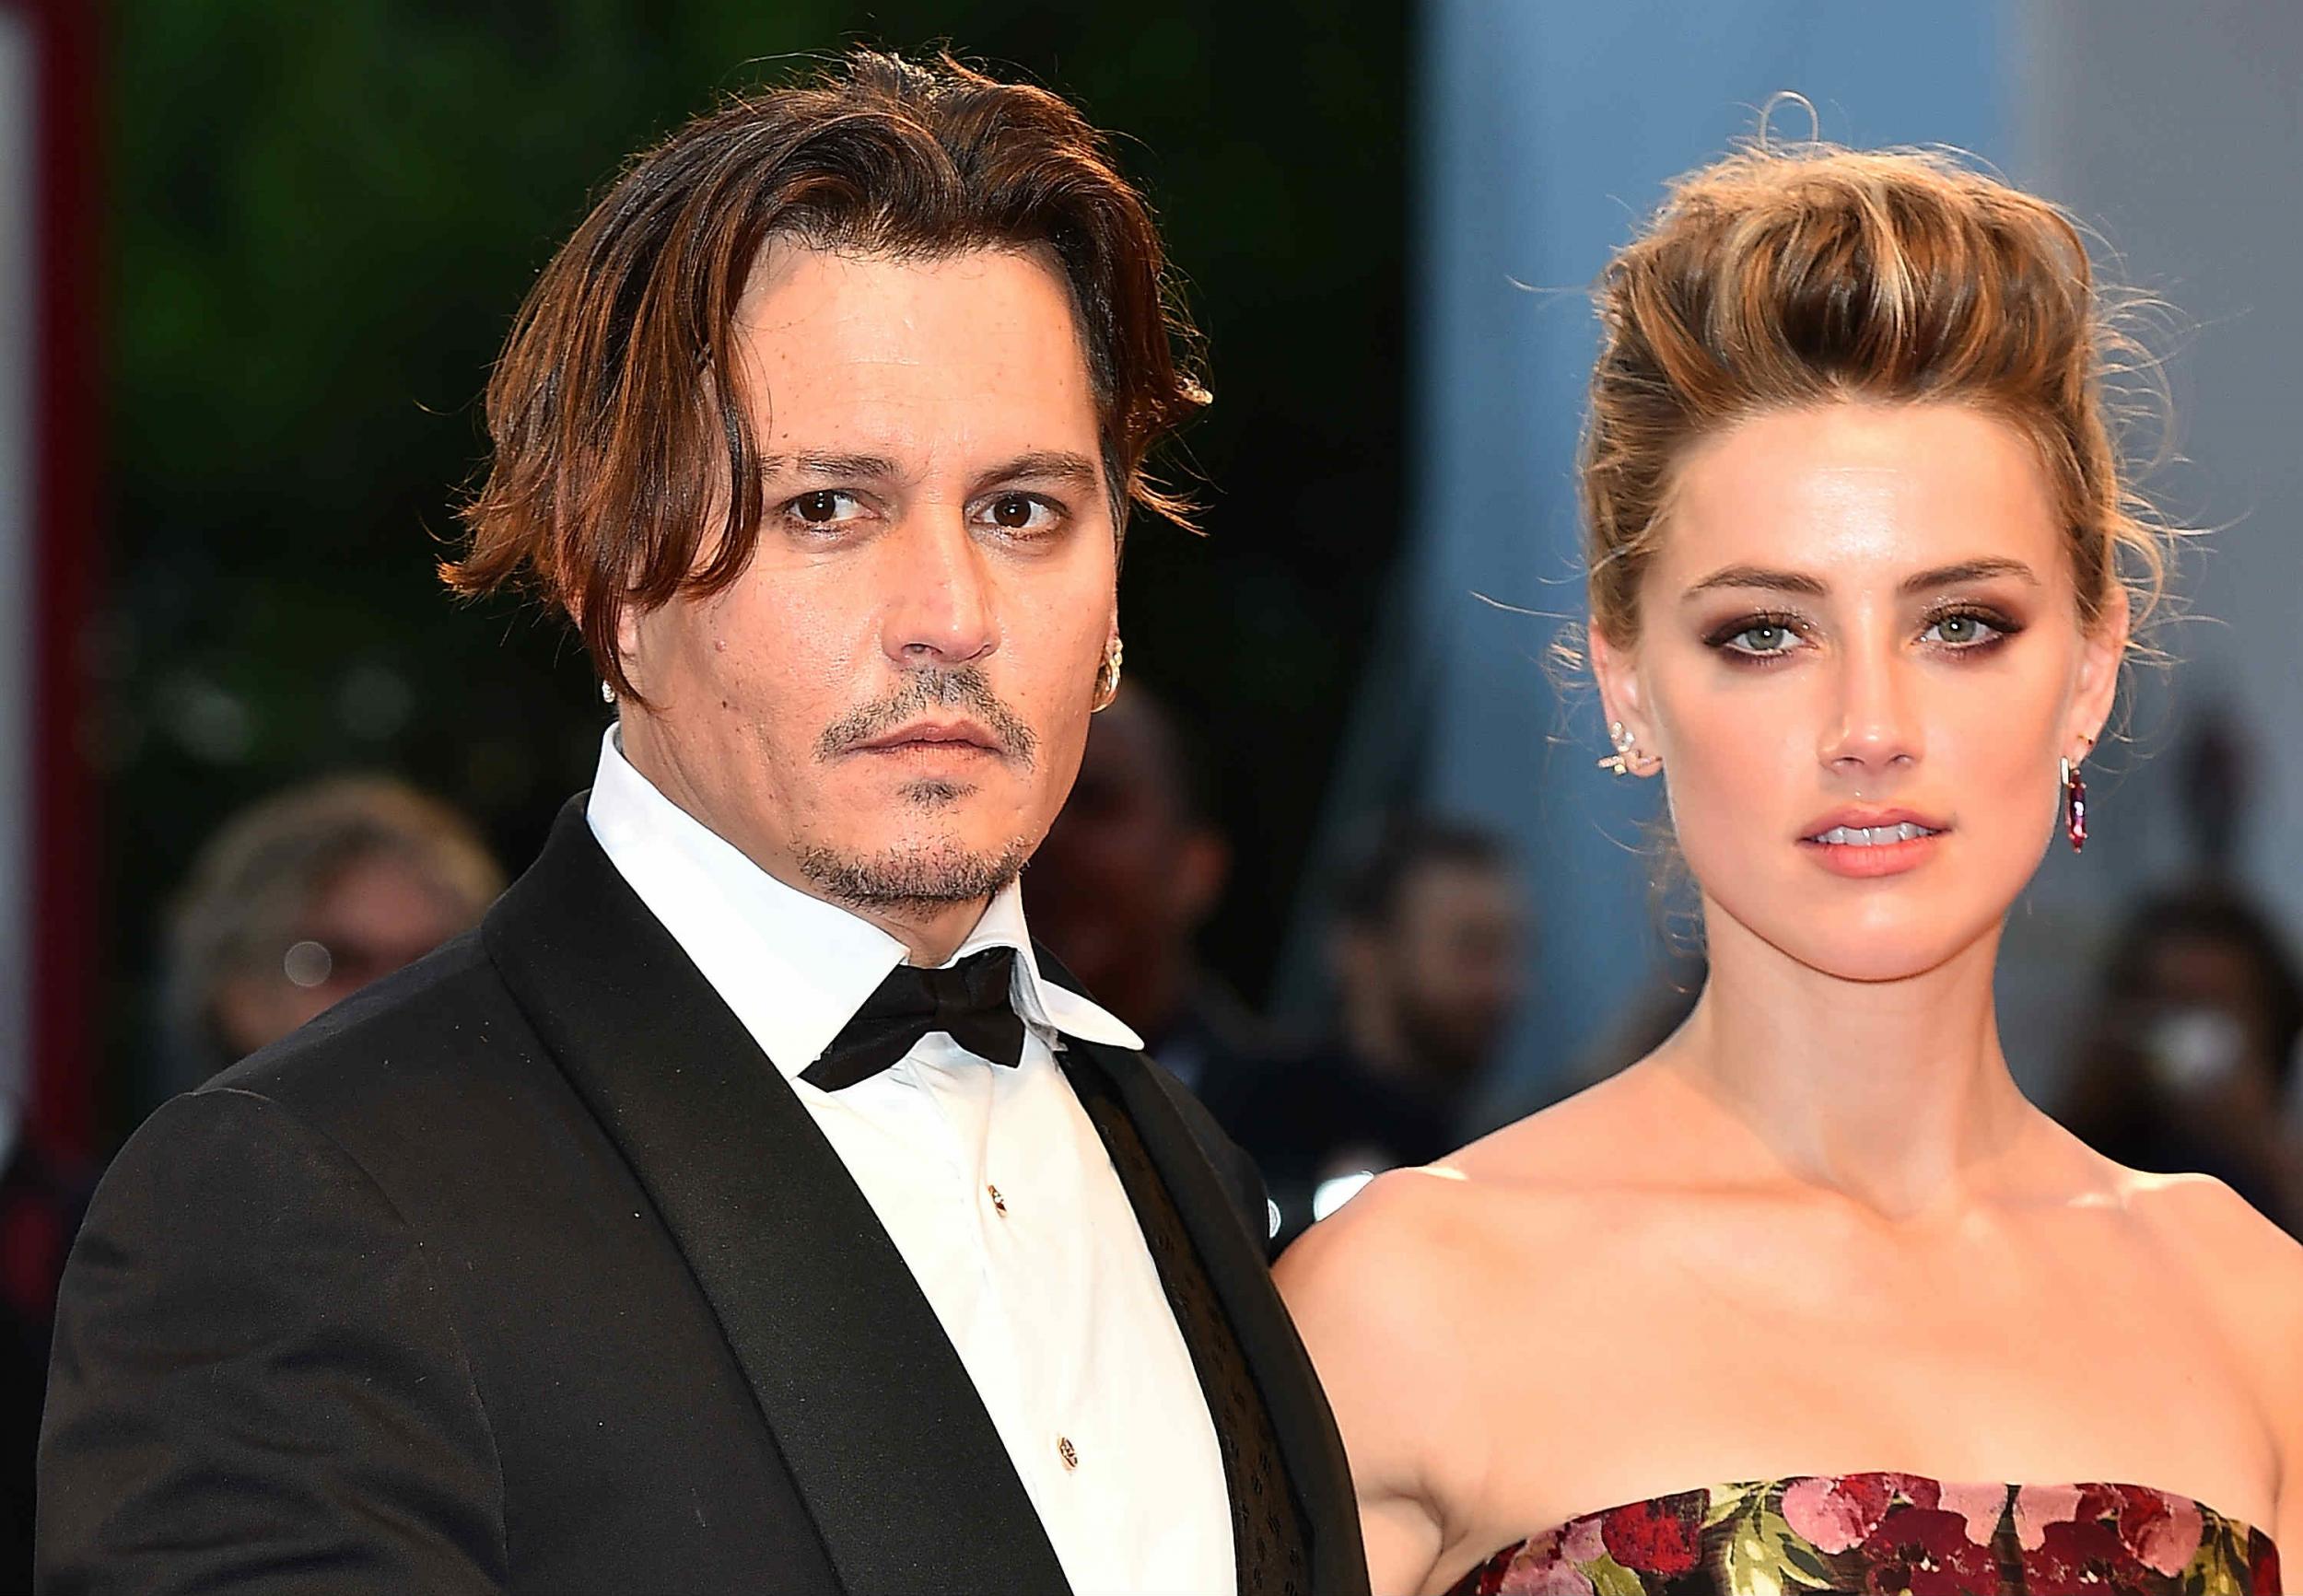 Heard was granted a temporary domestic violence restraining order against Depp after she alleged he had been violent towards her on multiple occasions during their 15-month marriage